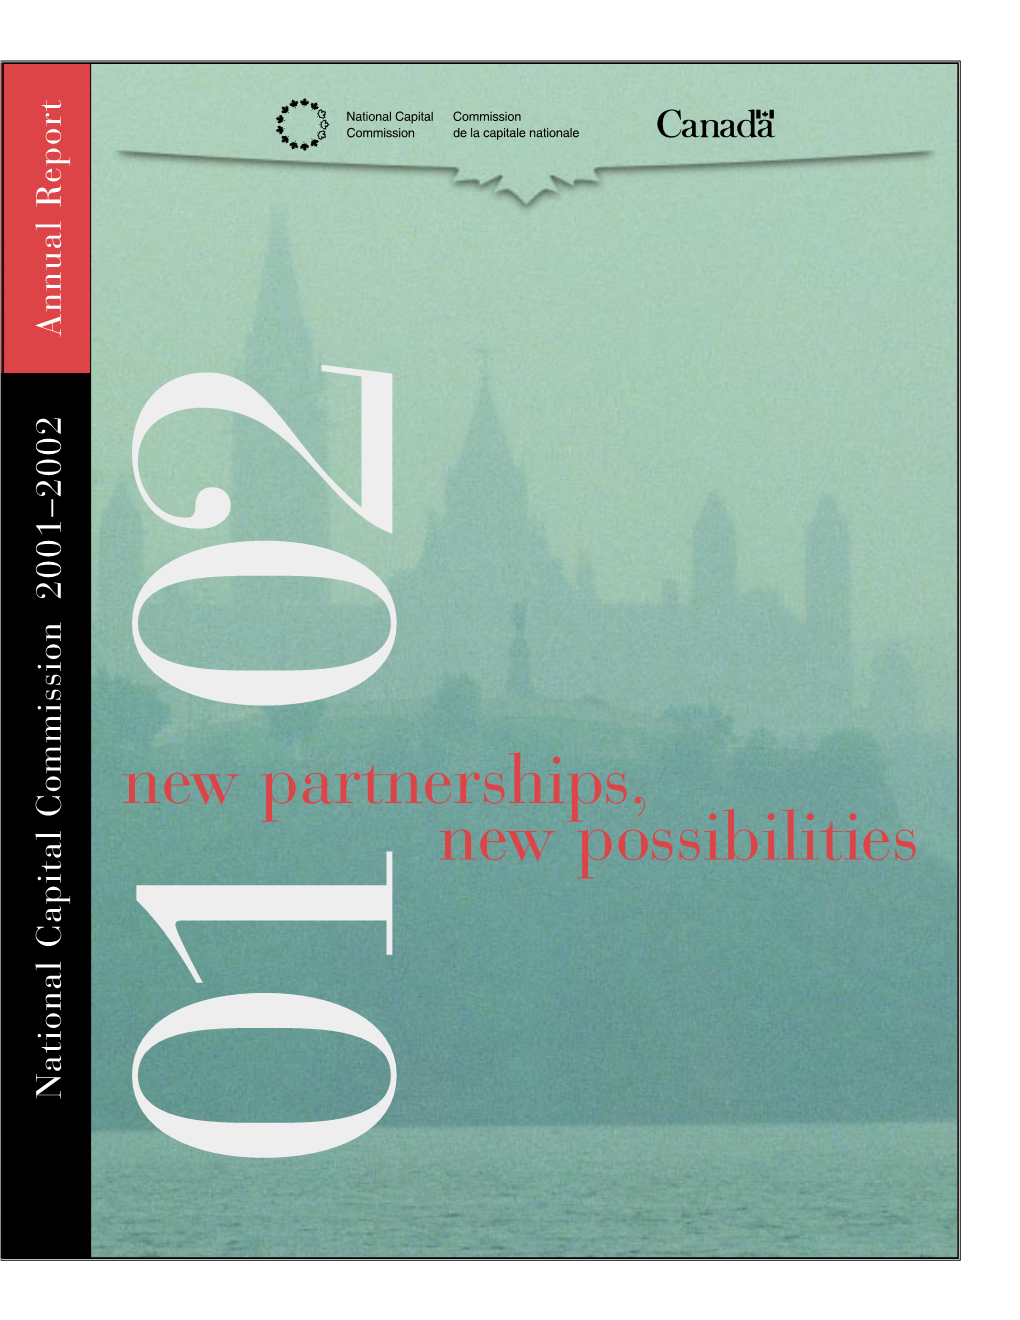 Annual Report 2001–2002, New Partnerships, New Possibilities Catalog Number: W91-2002 ISBN: 0-662-66541-4 2002 –